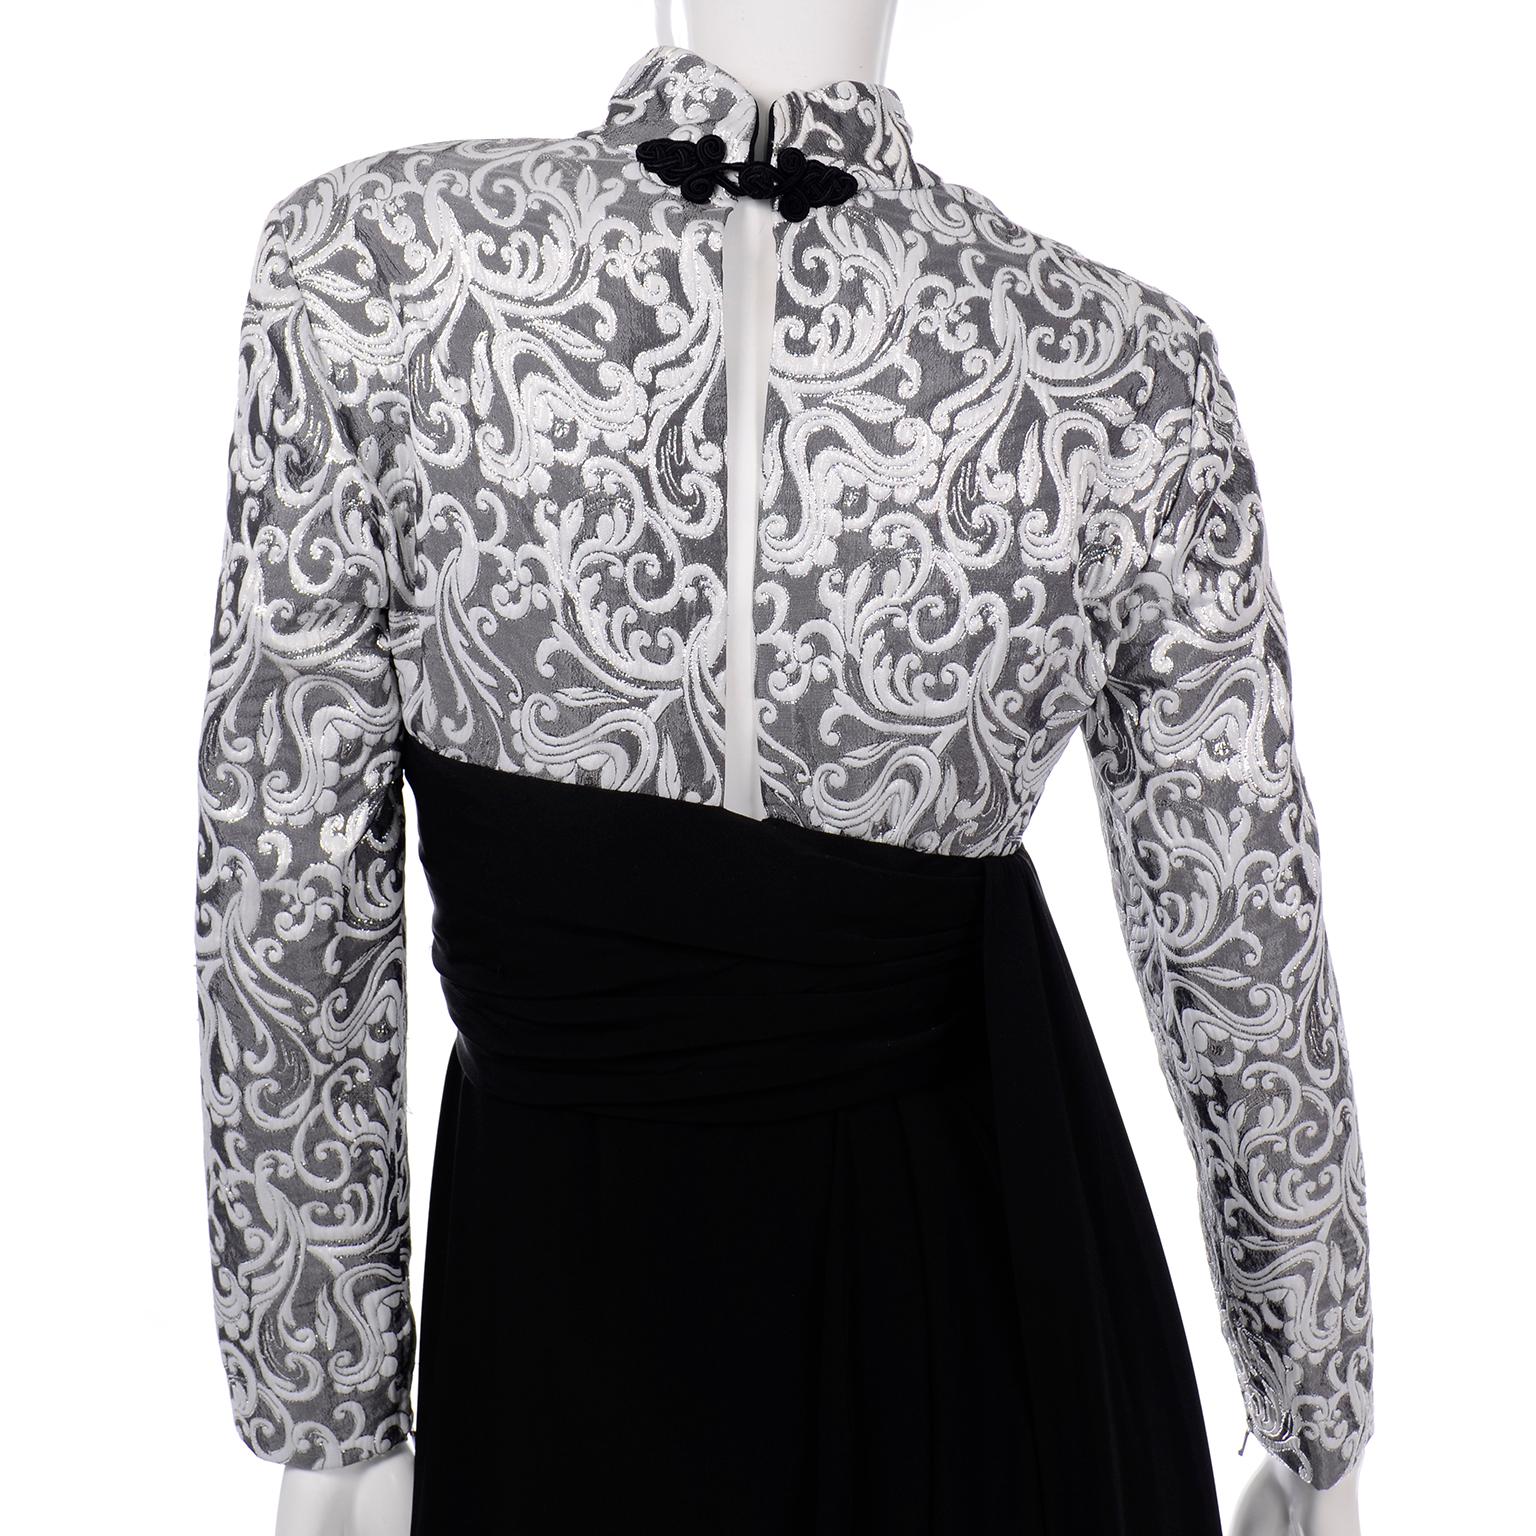 Vintage Jacques Fath Black Evening Dress With Silver & White Brocade Lace Print For Sale 3